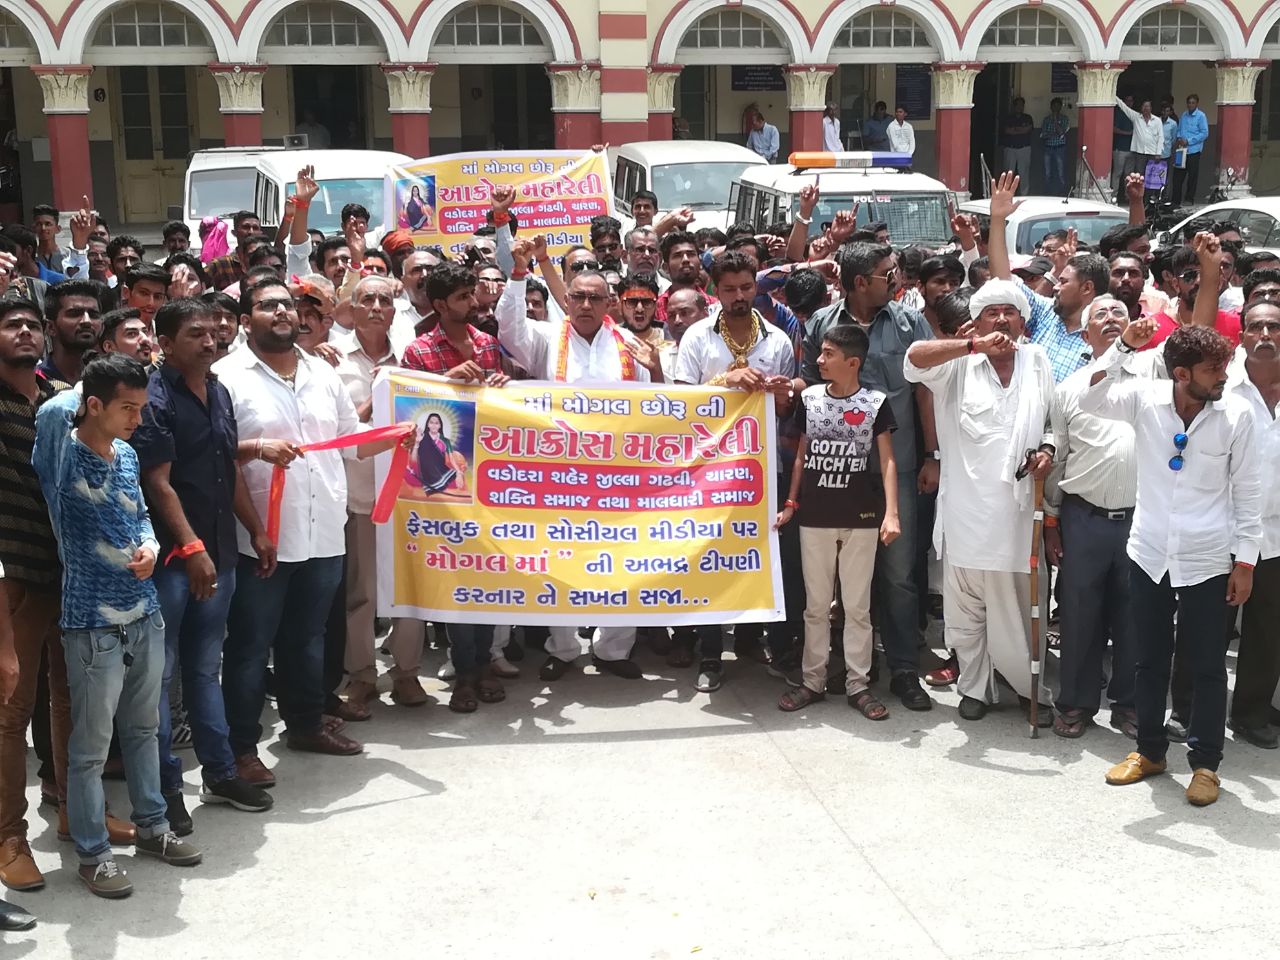 Charan Samaj and other groups protest against bad remarks for their deities on social media